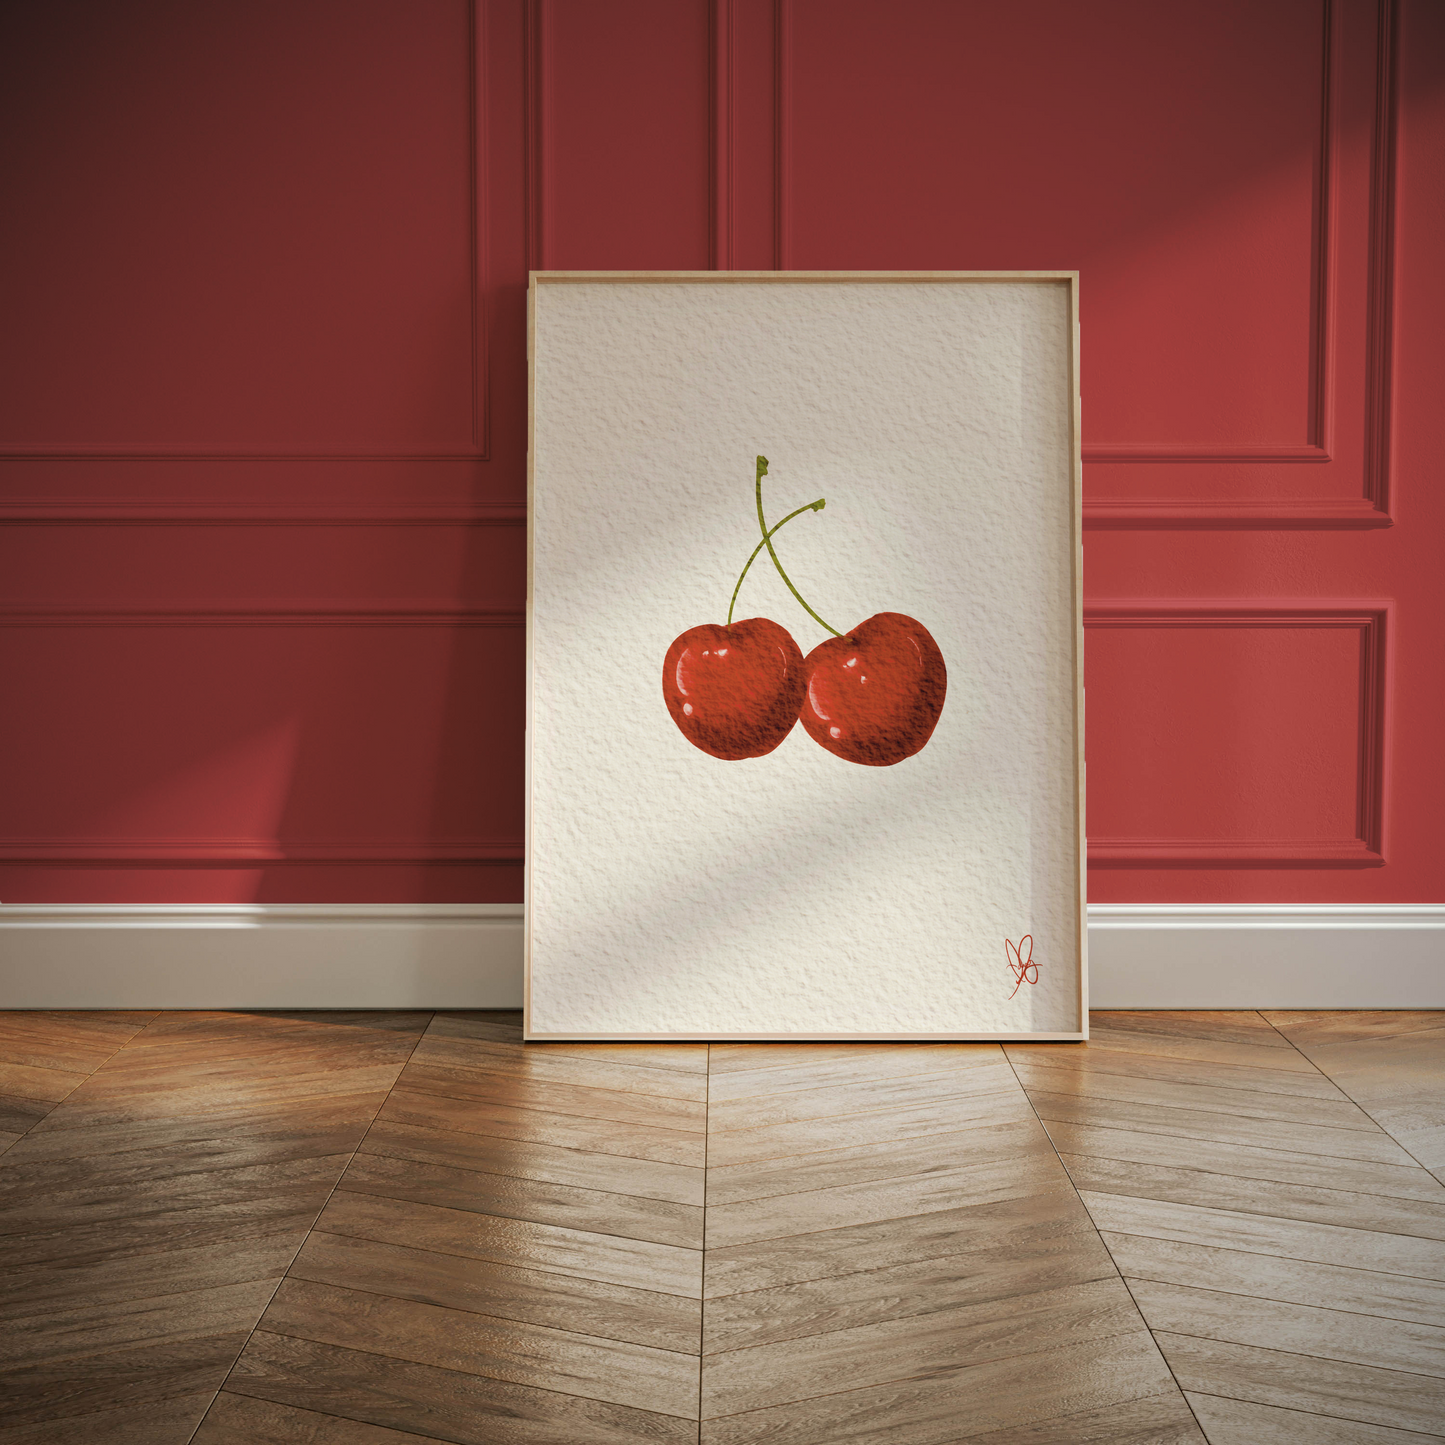 Unwrapped Collections hand-drawn cherry print digital artwork against a vintage red wall backdrop.